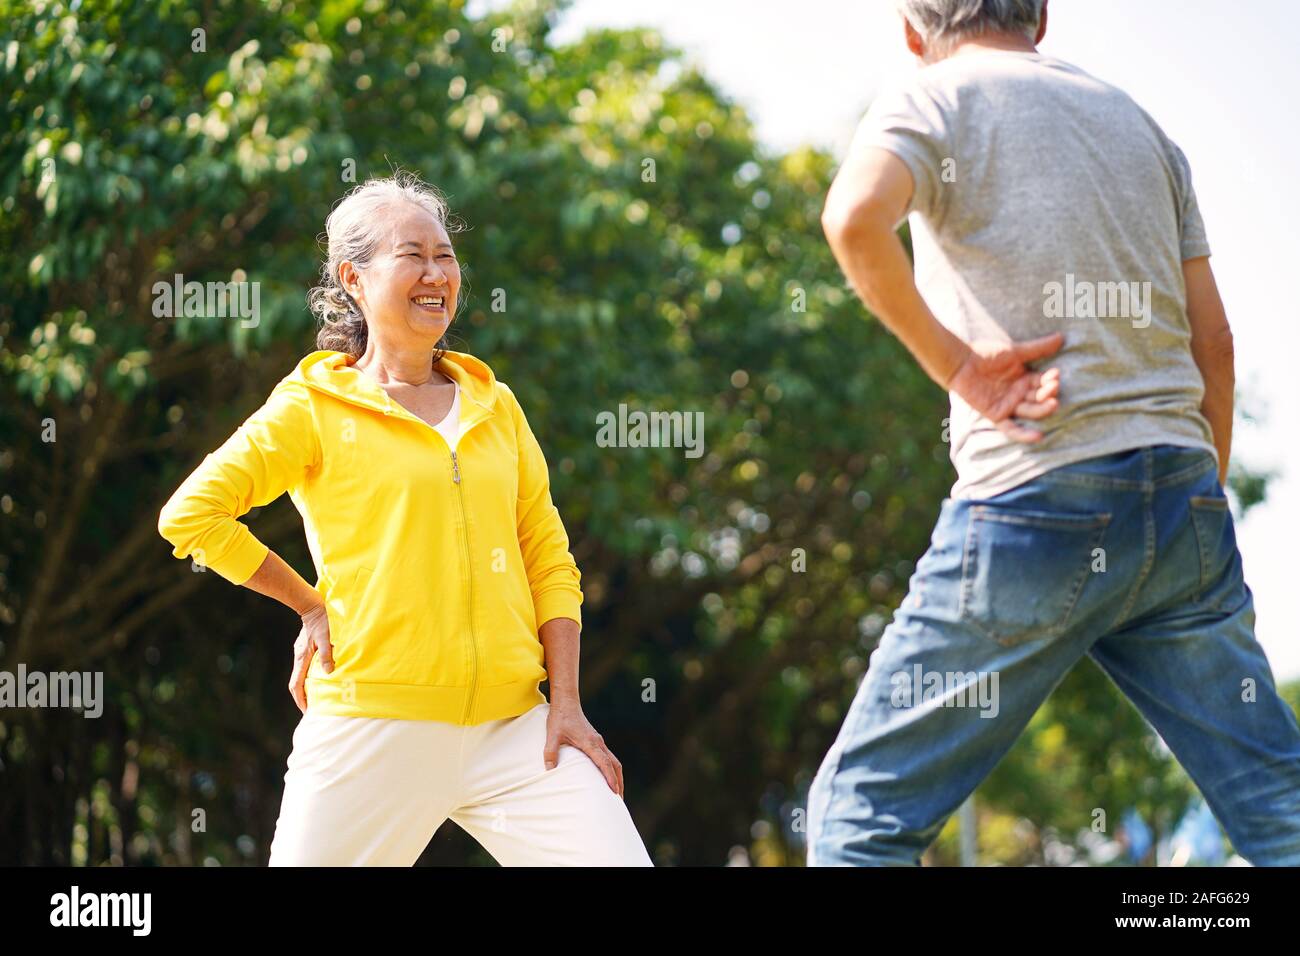 Happy senior asian couple exercising outdoors in park Banque D'Images